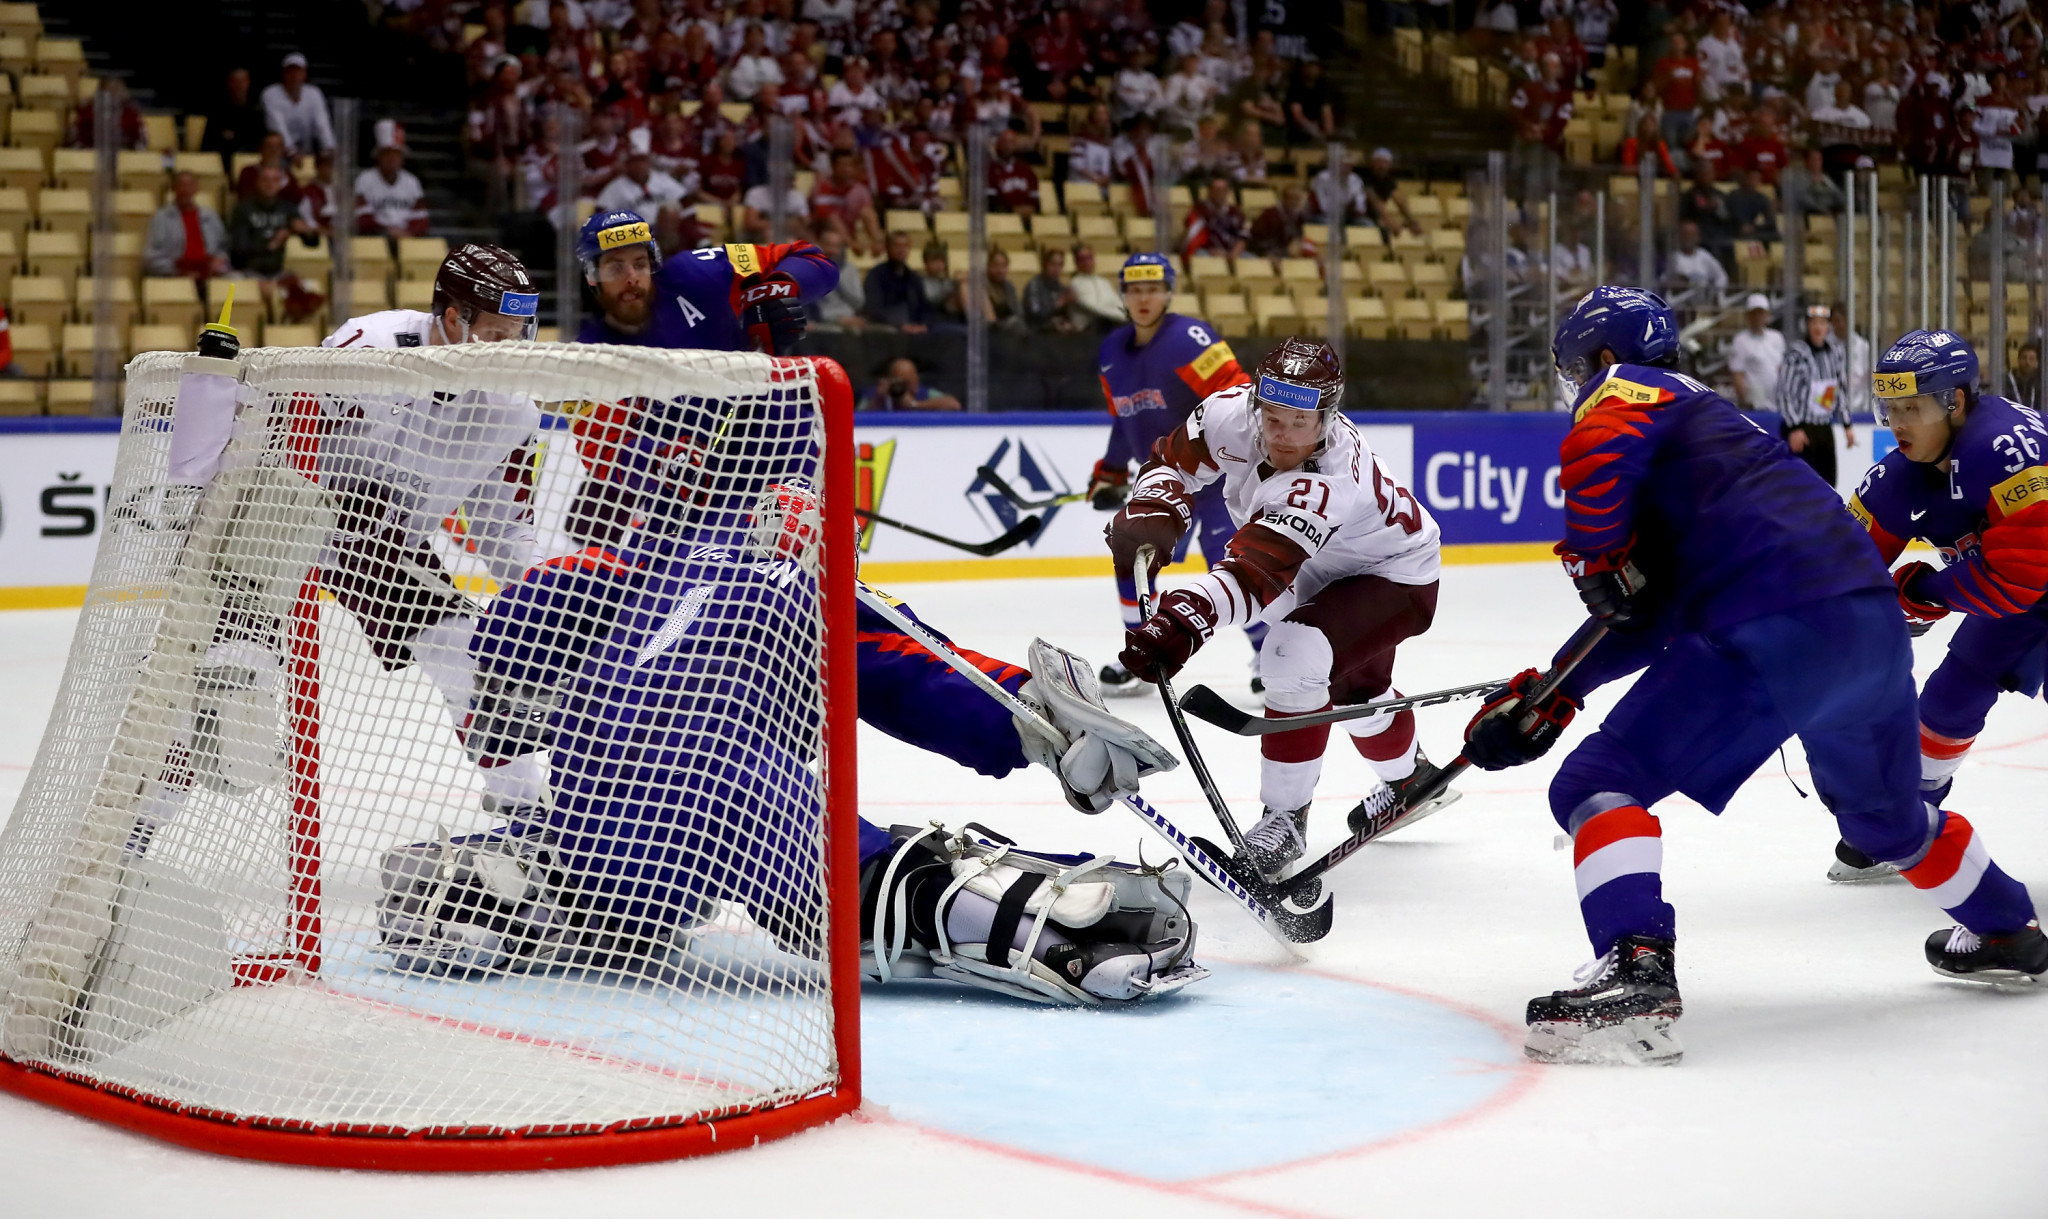 Latvia beat South Korea 5-0 in the other Group B match today ©Getty Images